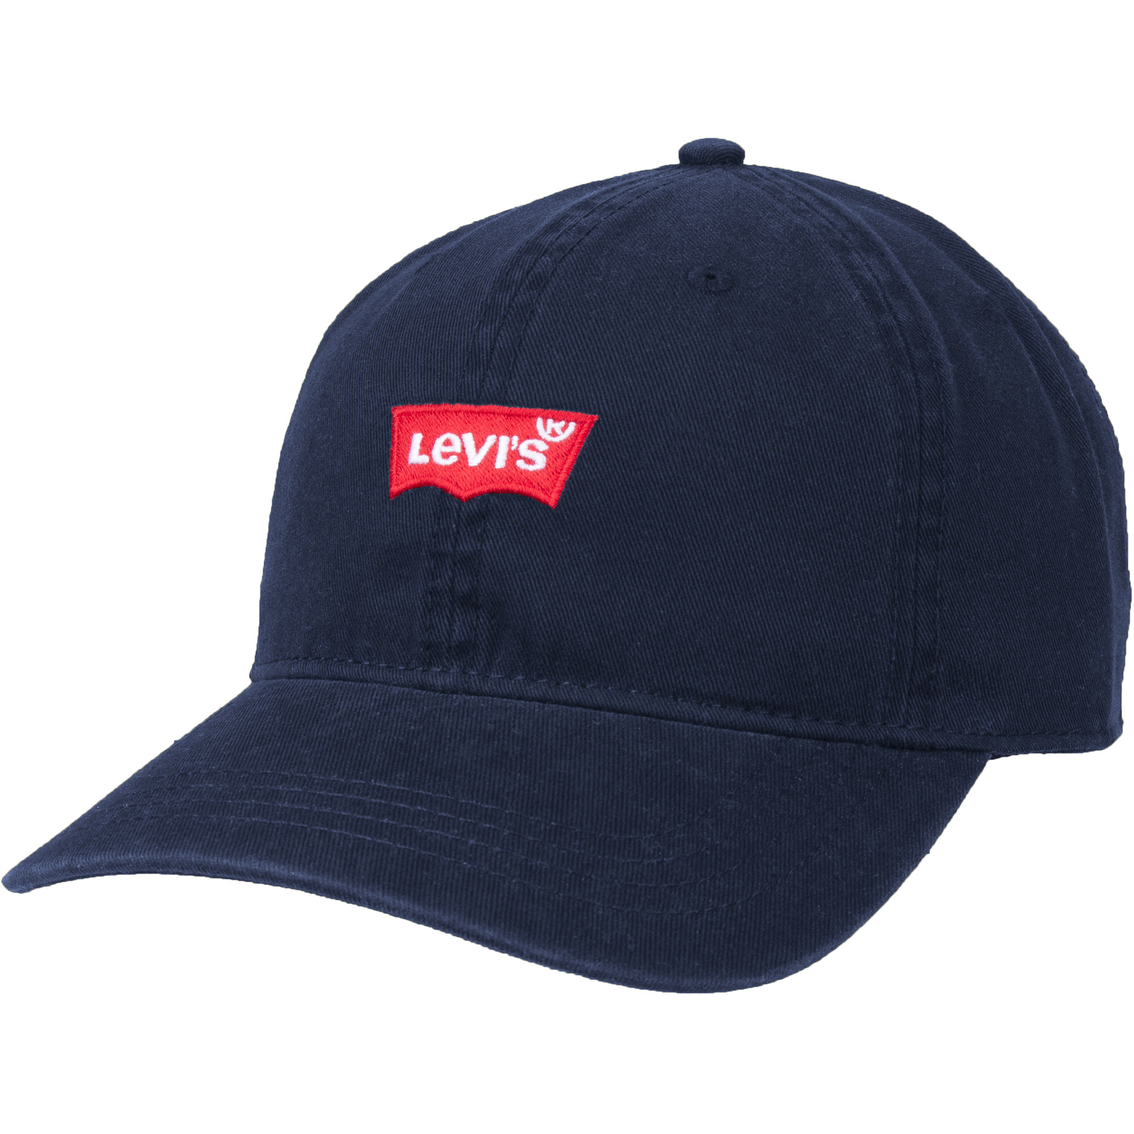 Levi's Twill Baseball Cap With Embroidered Batwing Navy | Hats & Visors ...